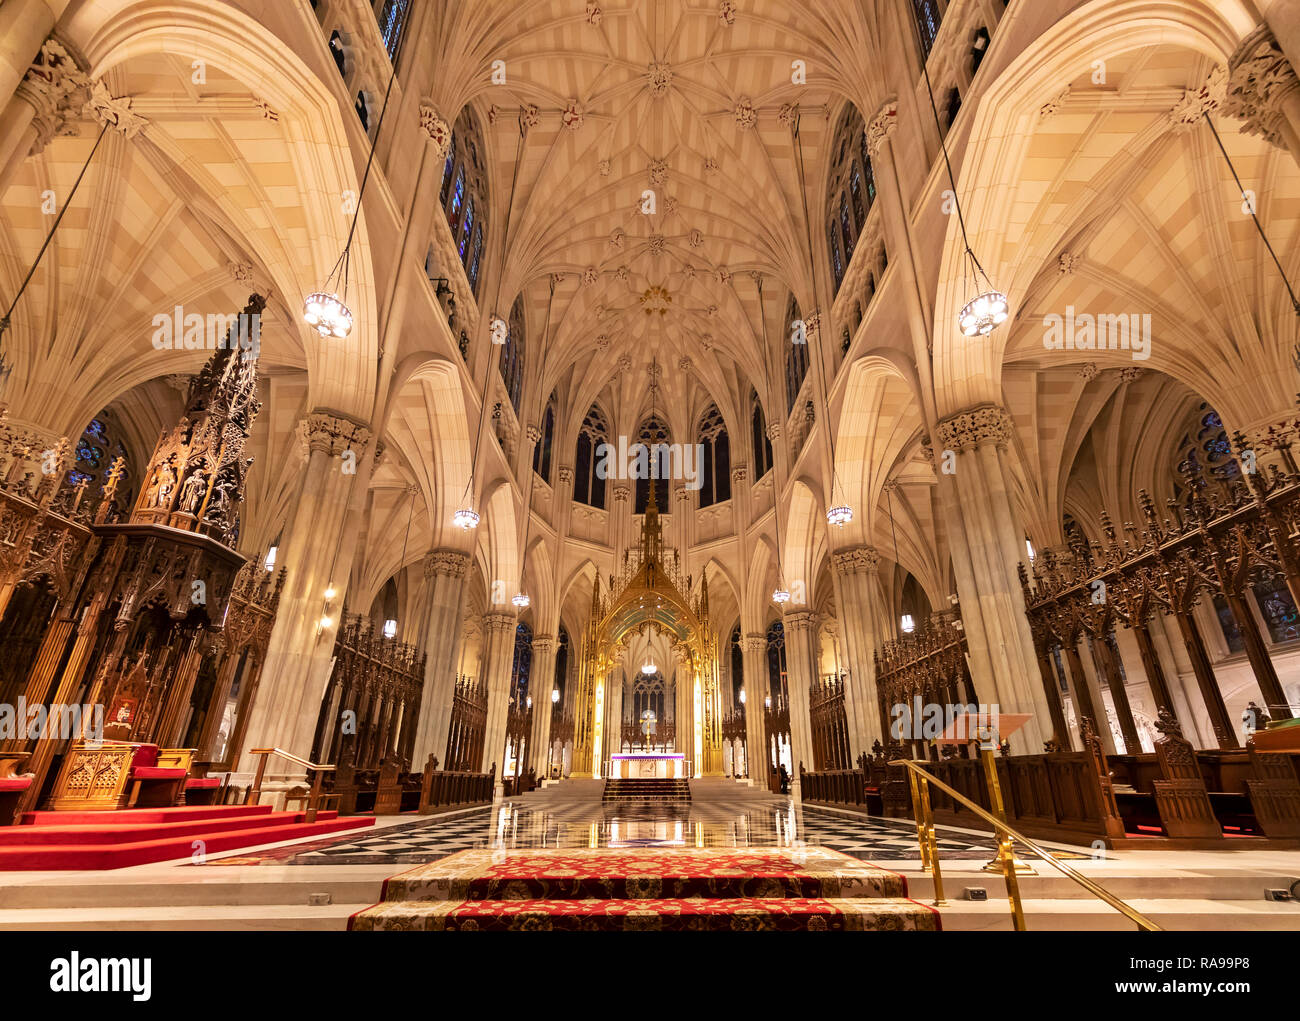 Interior view of tourists and the faithful visiting St. Patrick's Catheldral, New York City. Stock Photo